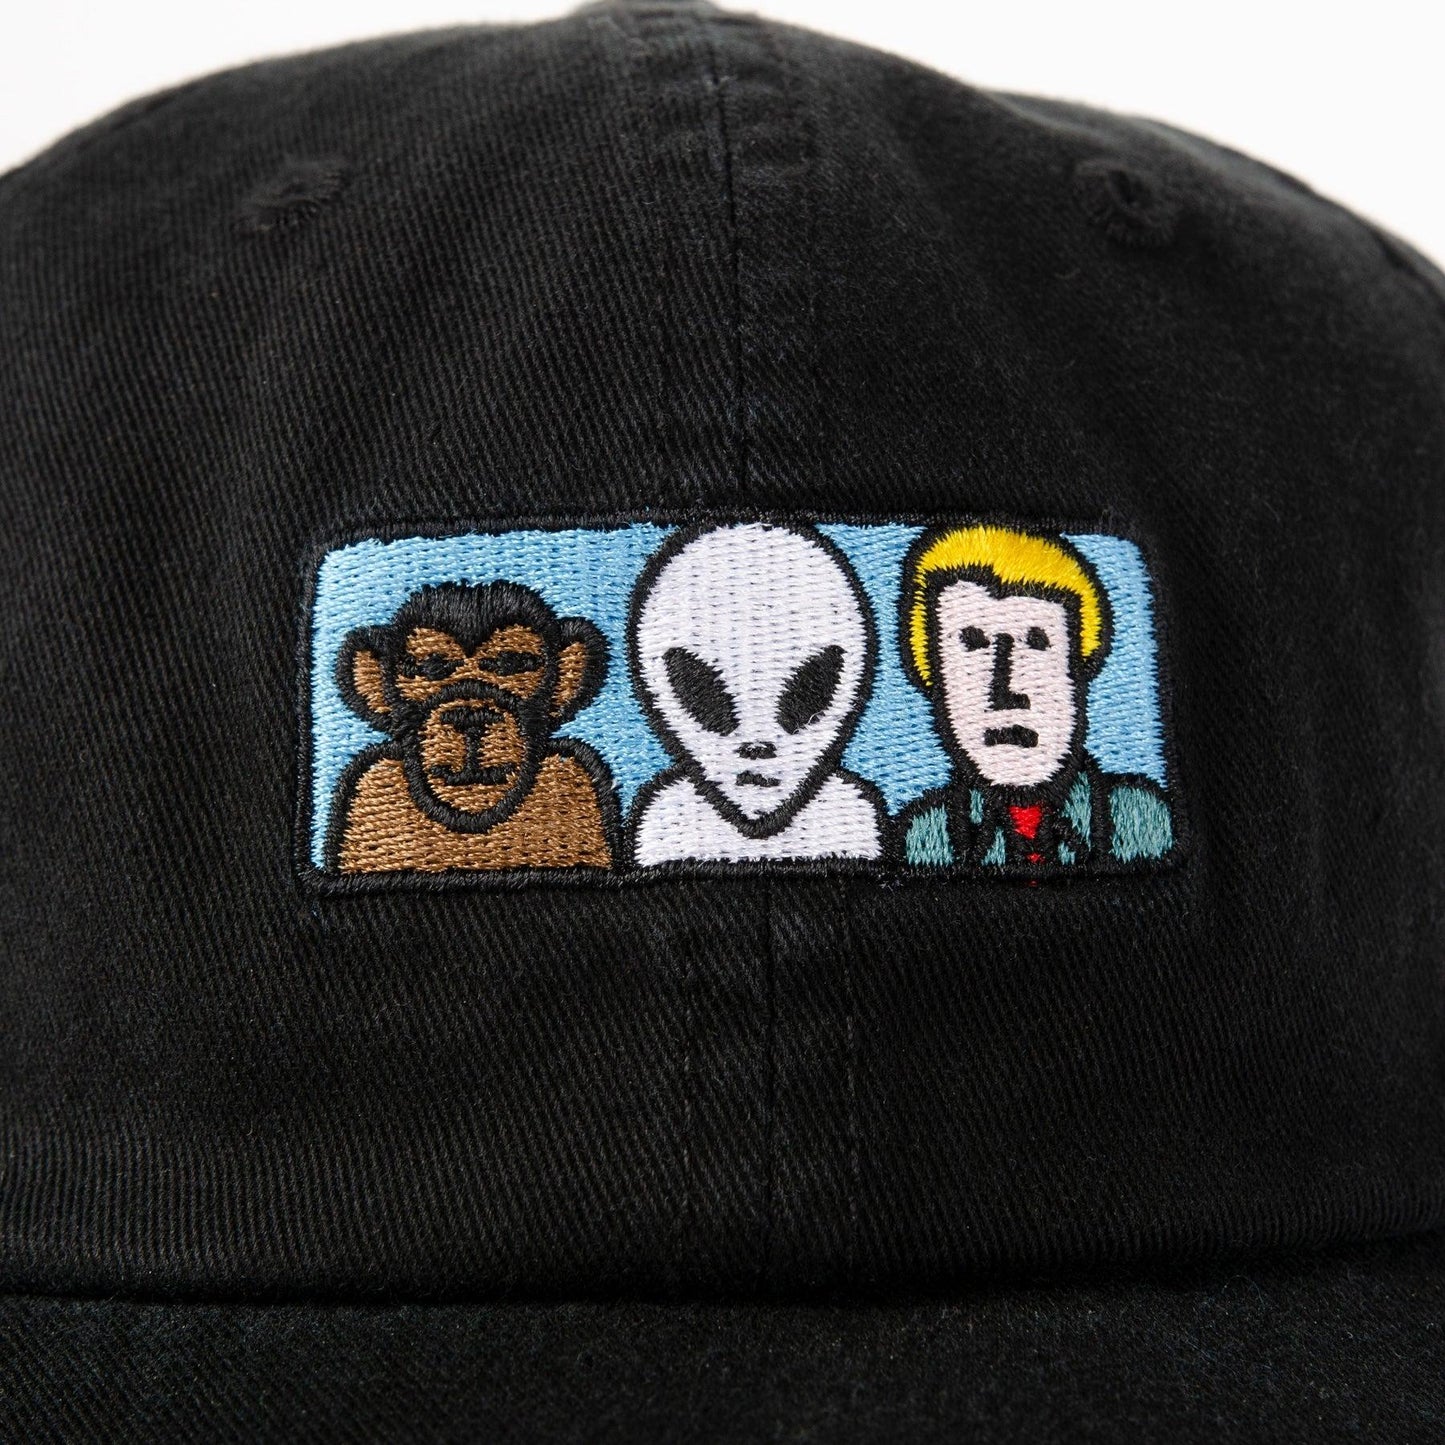 Missing Link Embroidered Twill Cap Black